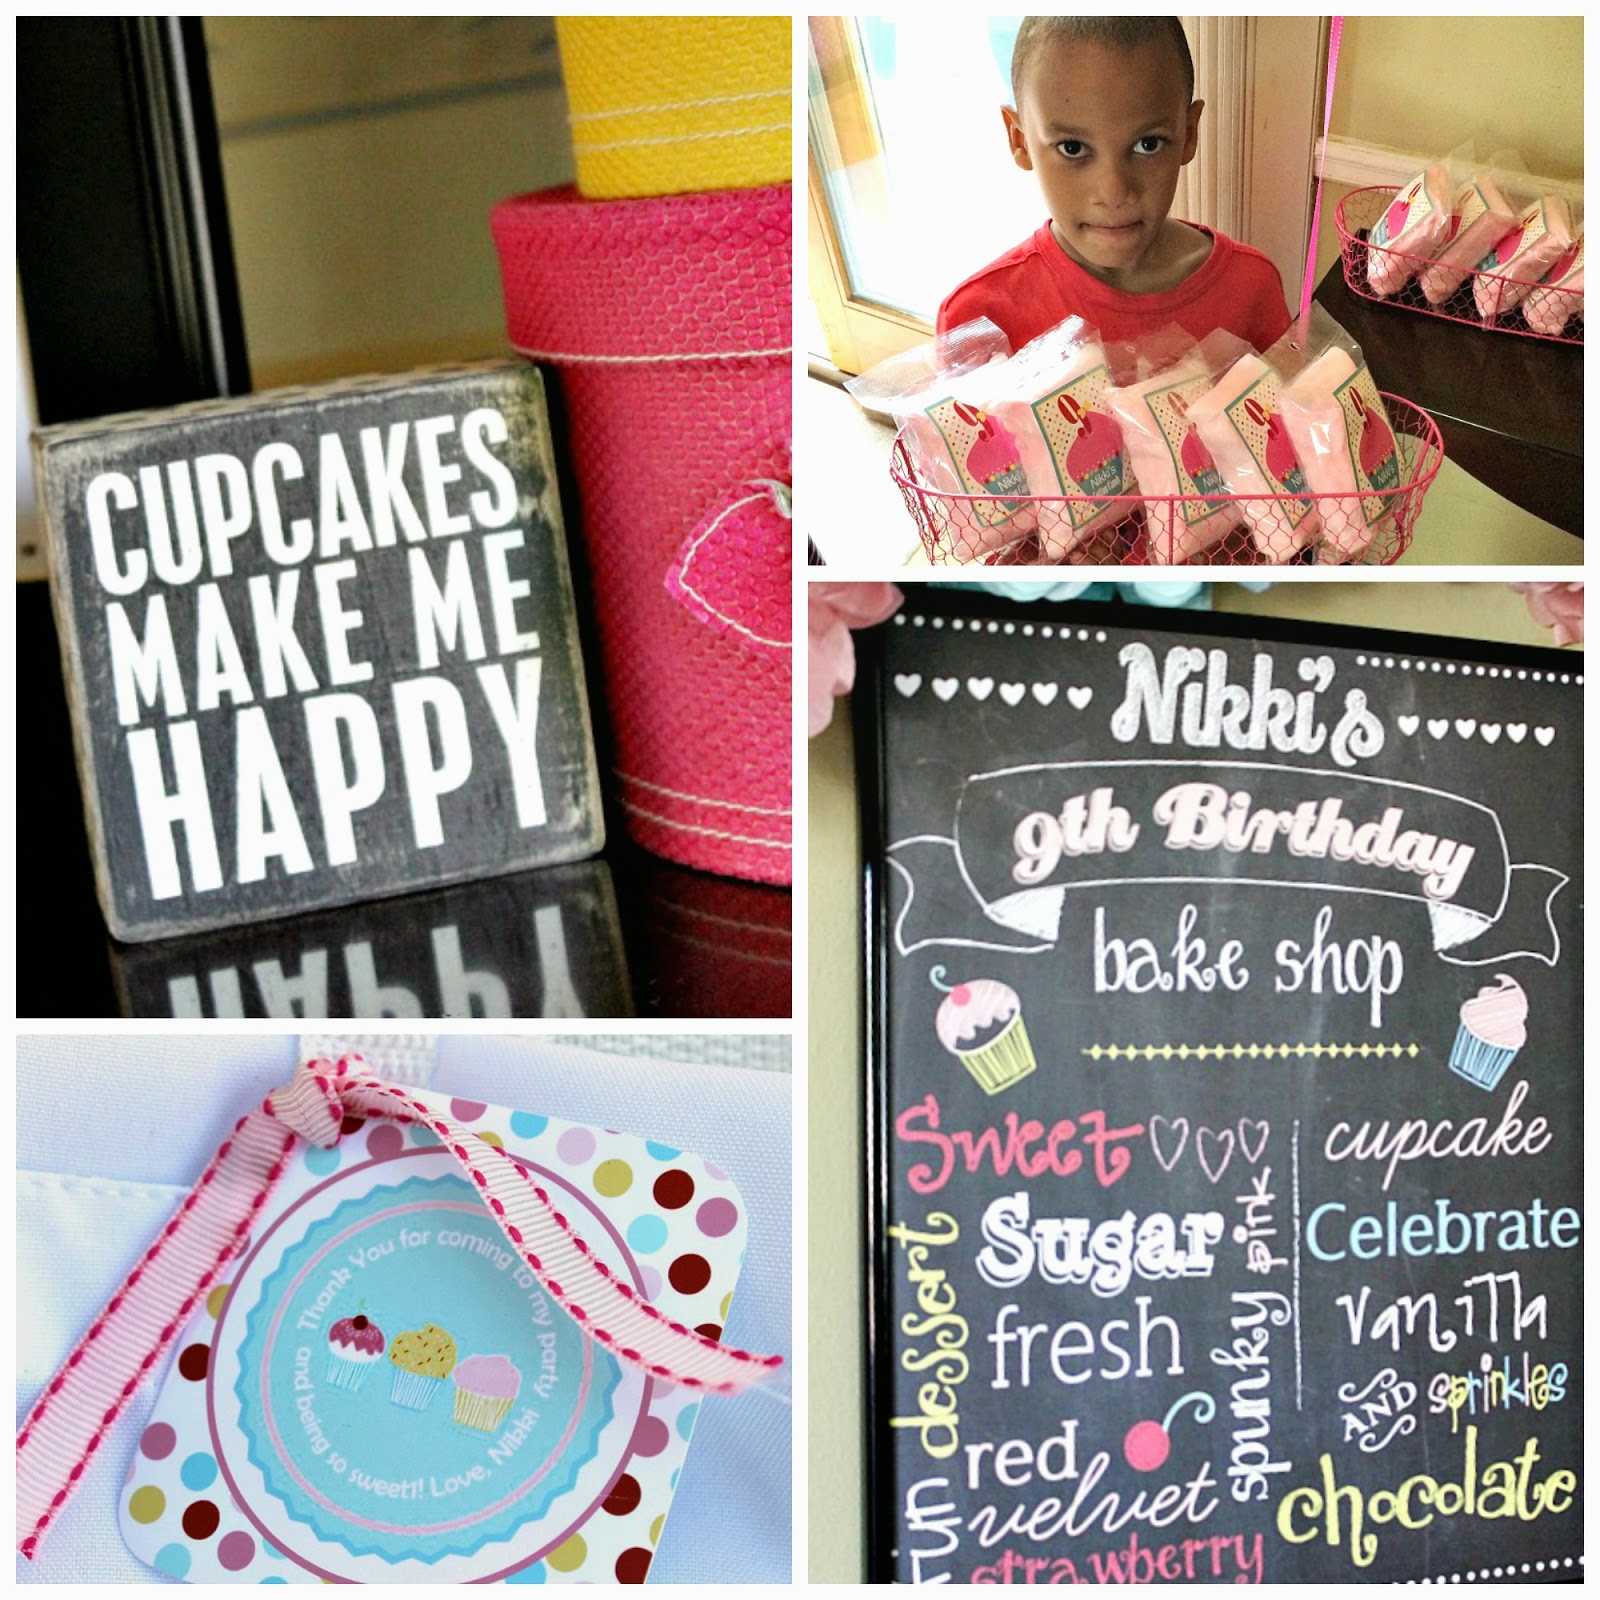 custom cotton candy bags, soiree events, sunny by design, tomkat studio, paper+pop, cupcake party ideas, cupcakes make me happy